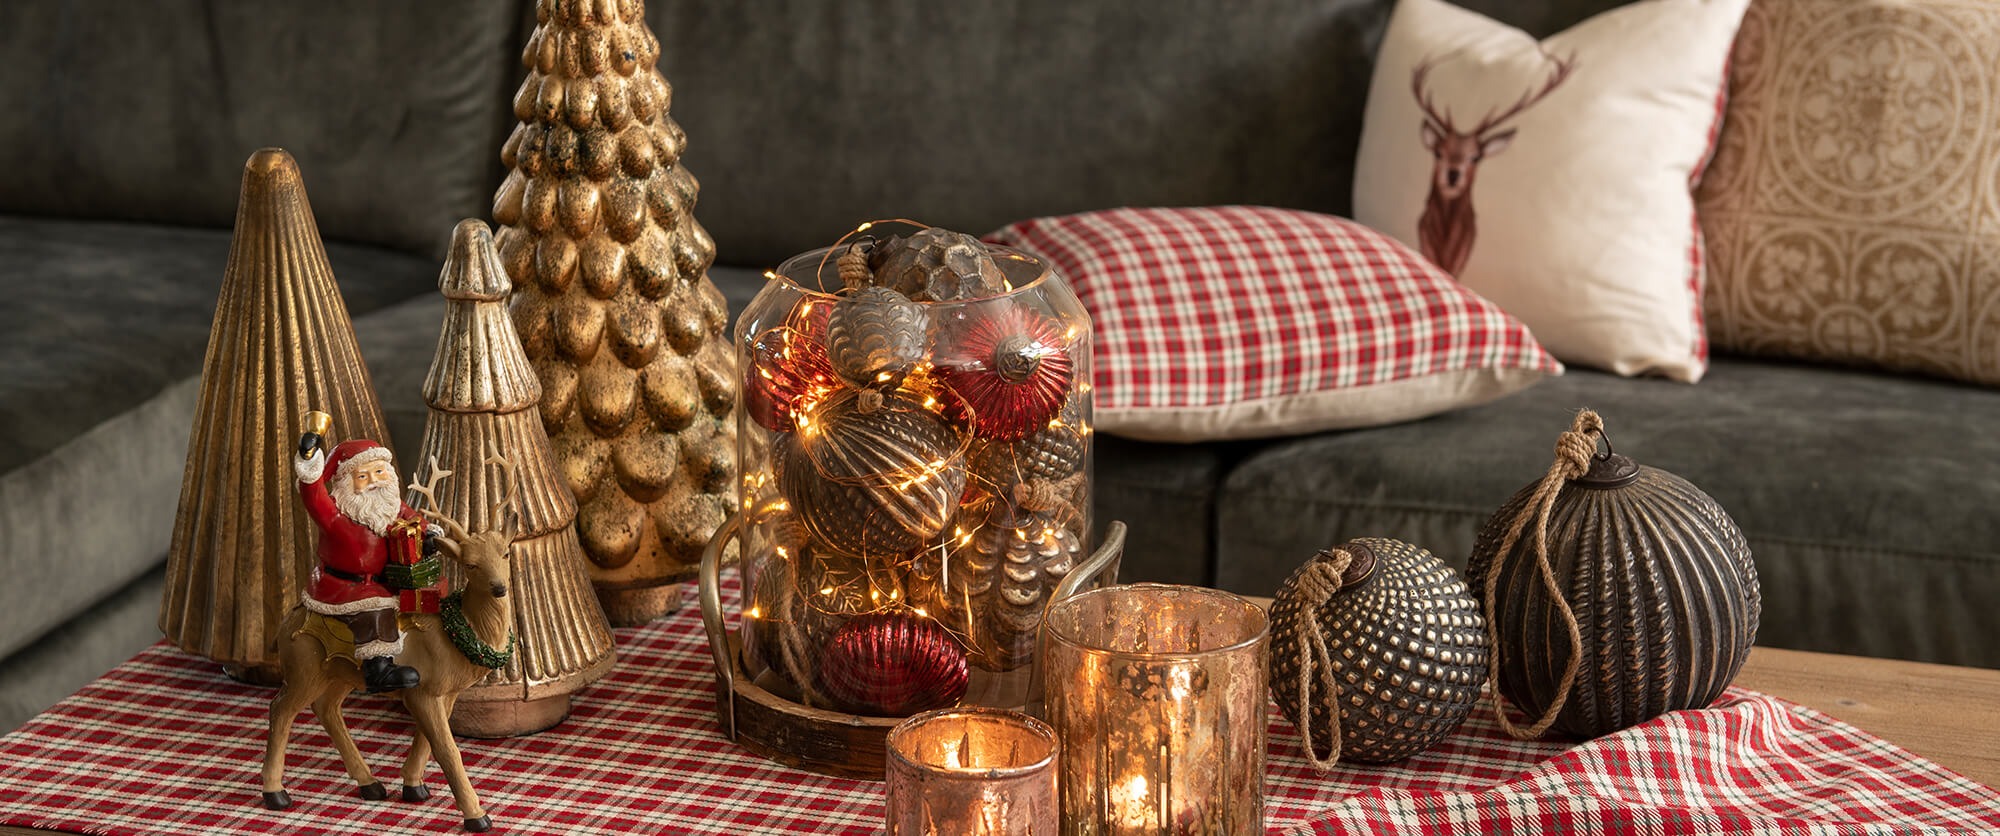 Get your home ready for Christmas!